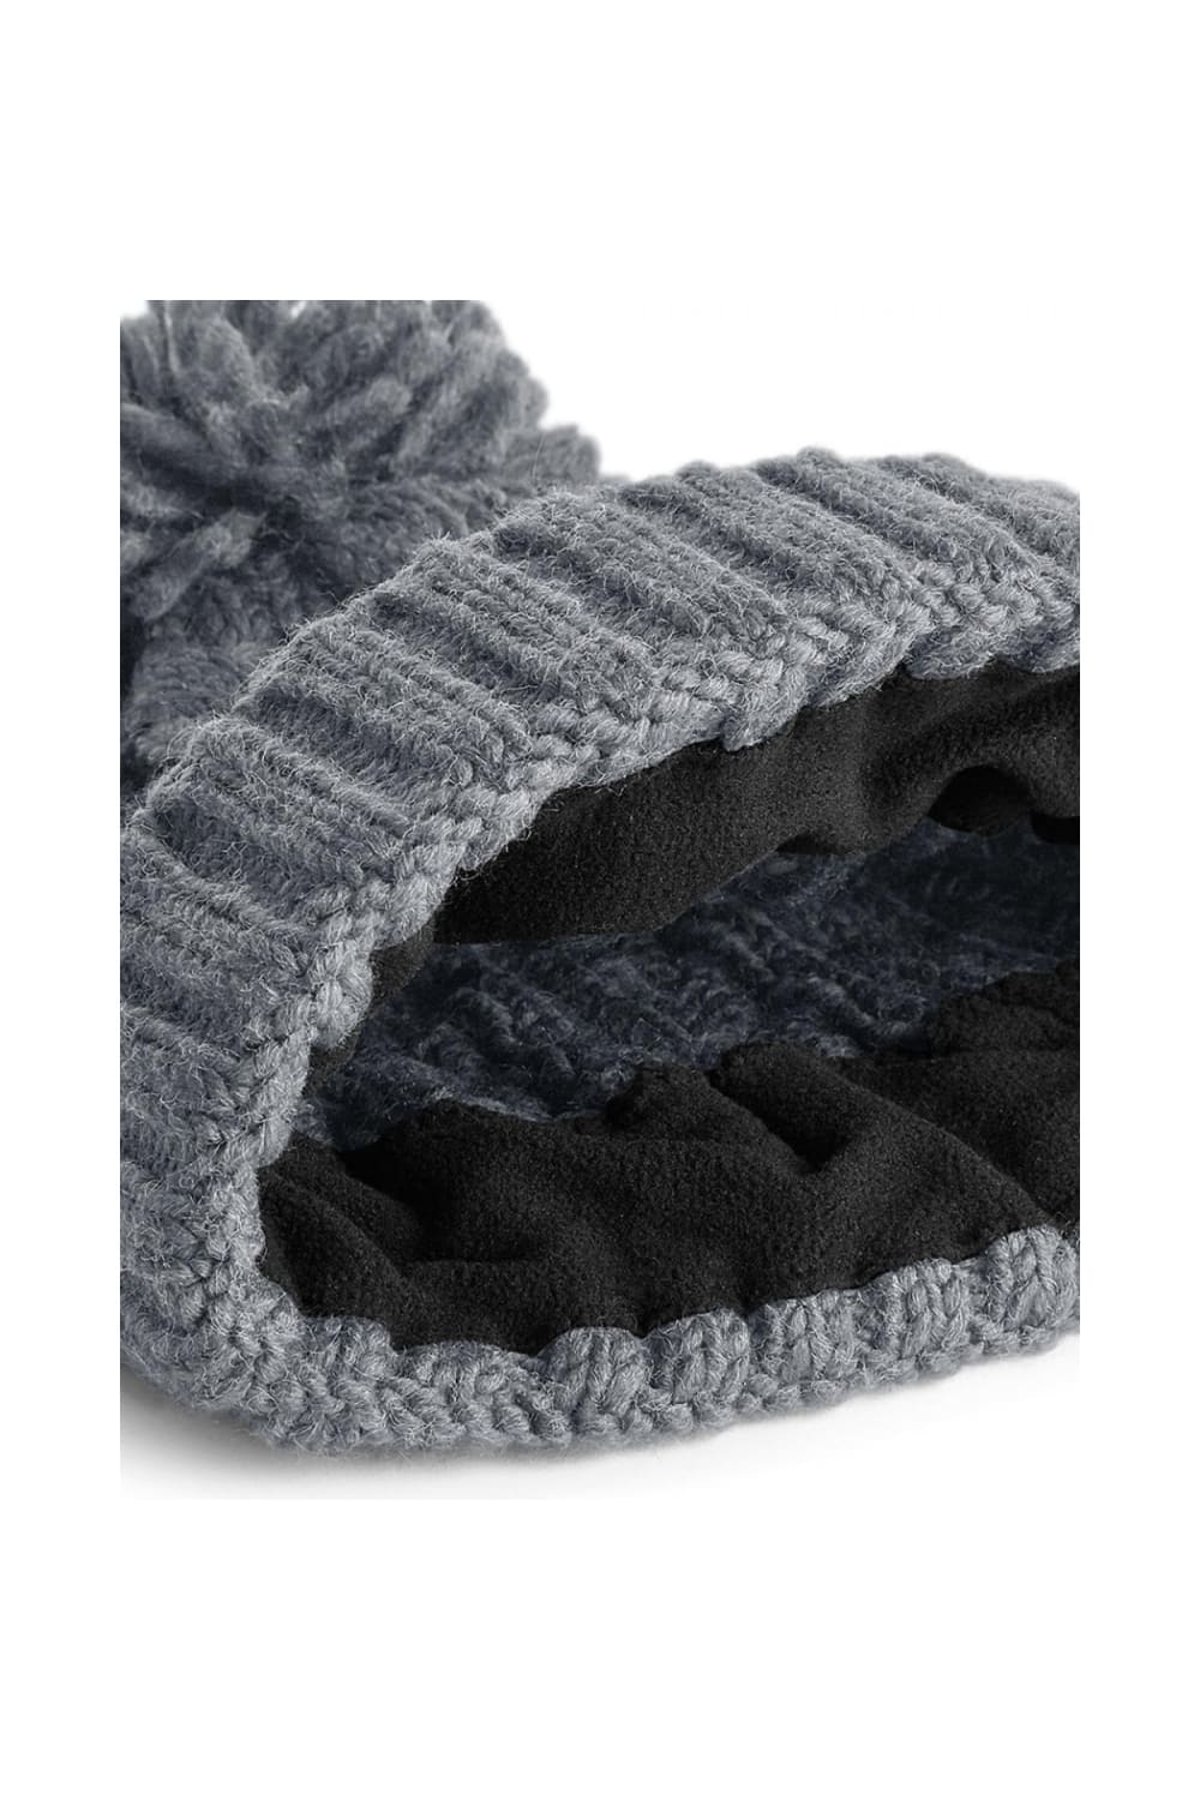 Beechfield Unsiex Adults Cable Knit Melange Beanie BC4137 